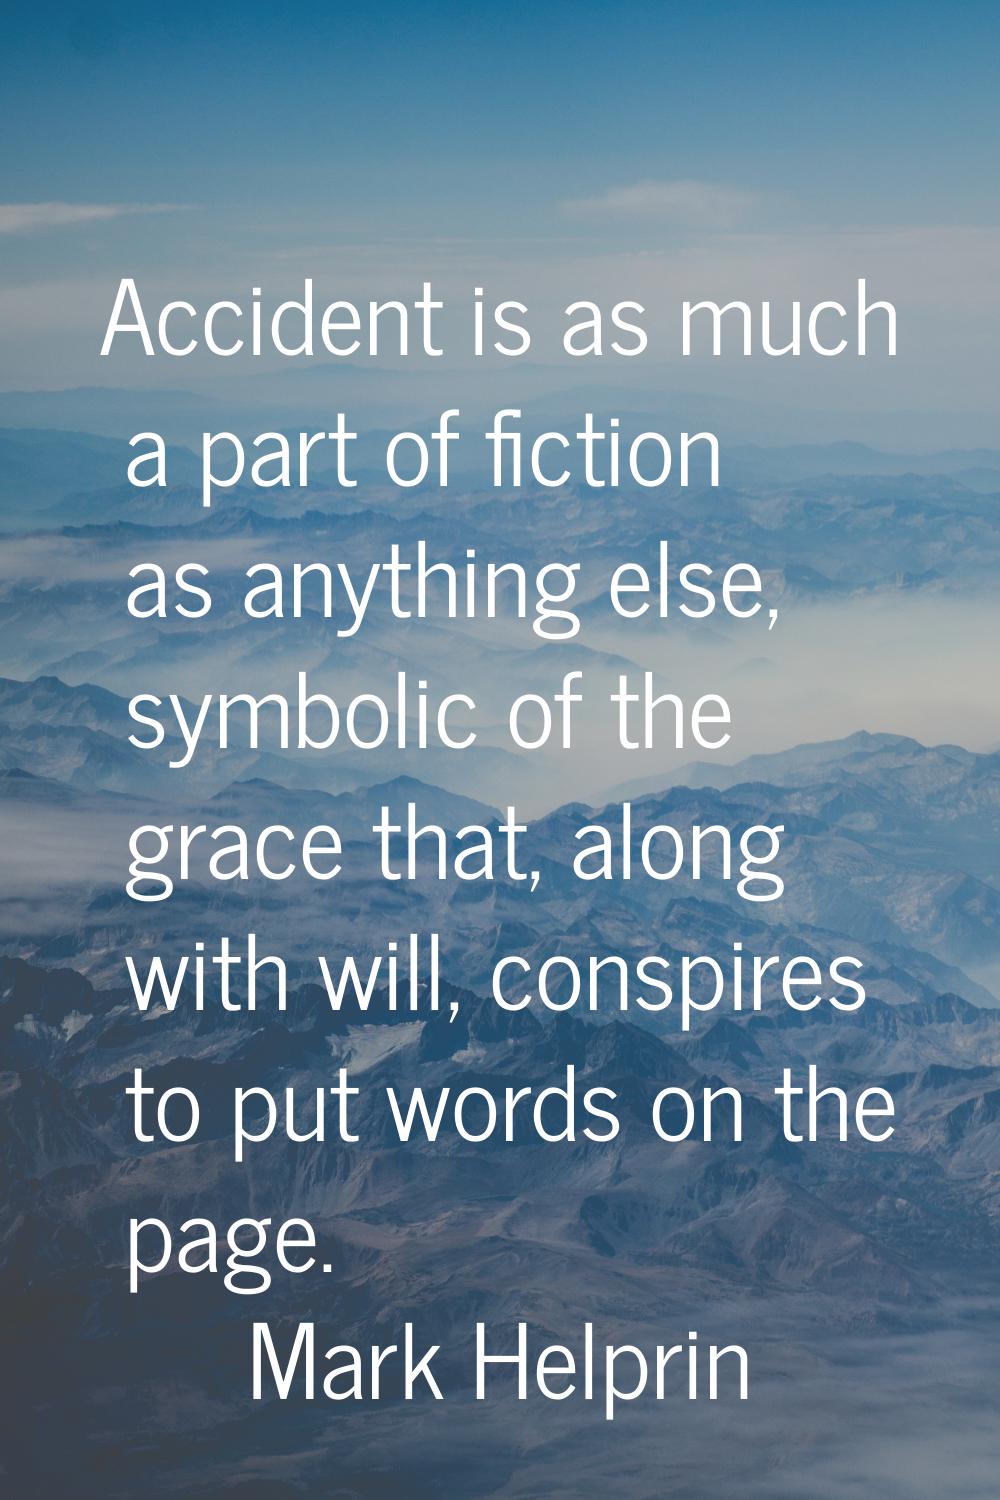 Accident is as much a part of fiction as anything else, symbolic of the grace that, along with will